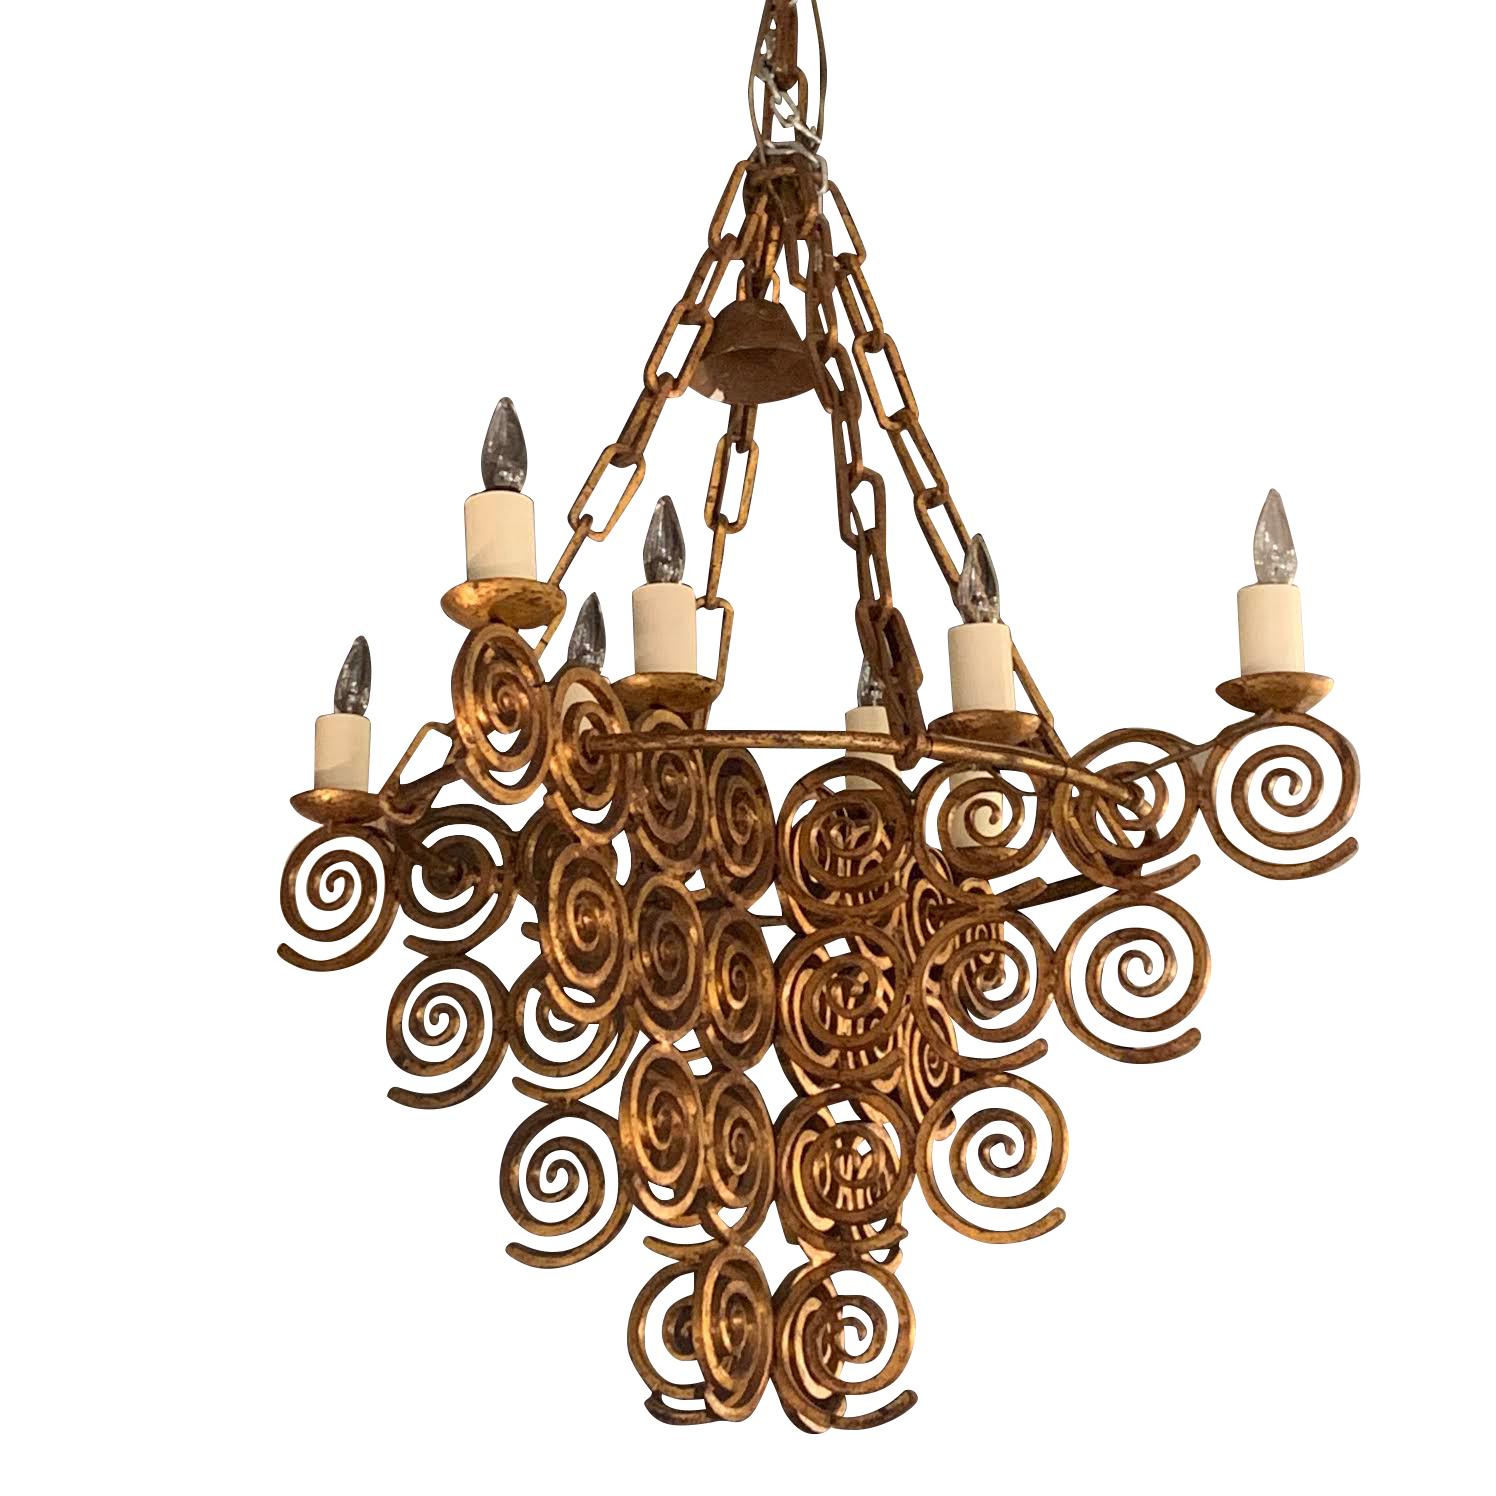 1950s Spanish gold gilt wrought iron eight-arm chandelier
There are four panels composed of wrought iron swirls. These meet in the center and connect to a circular rod.
Two candelabras sit atop each 